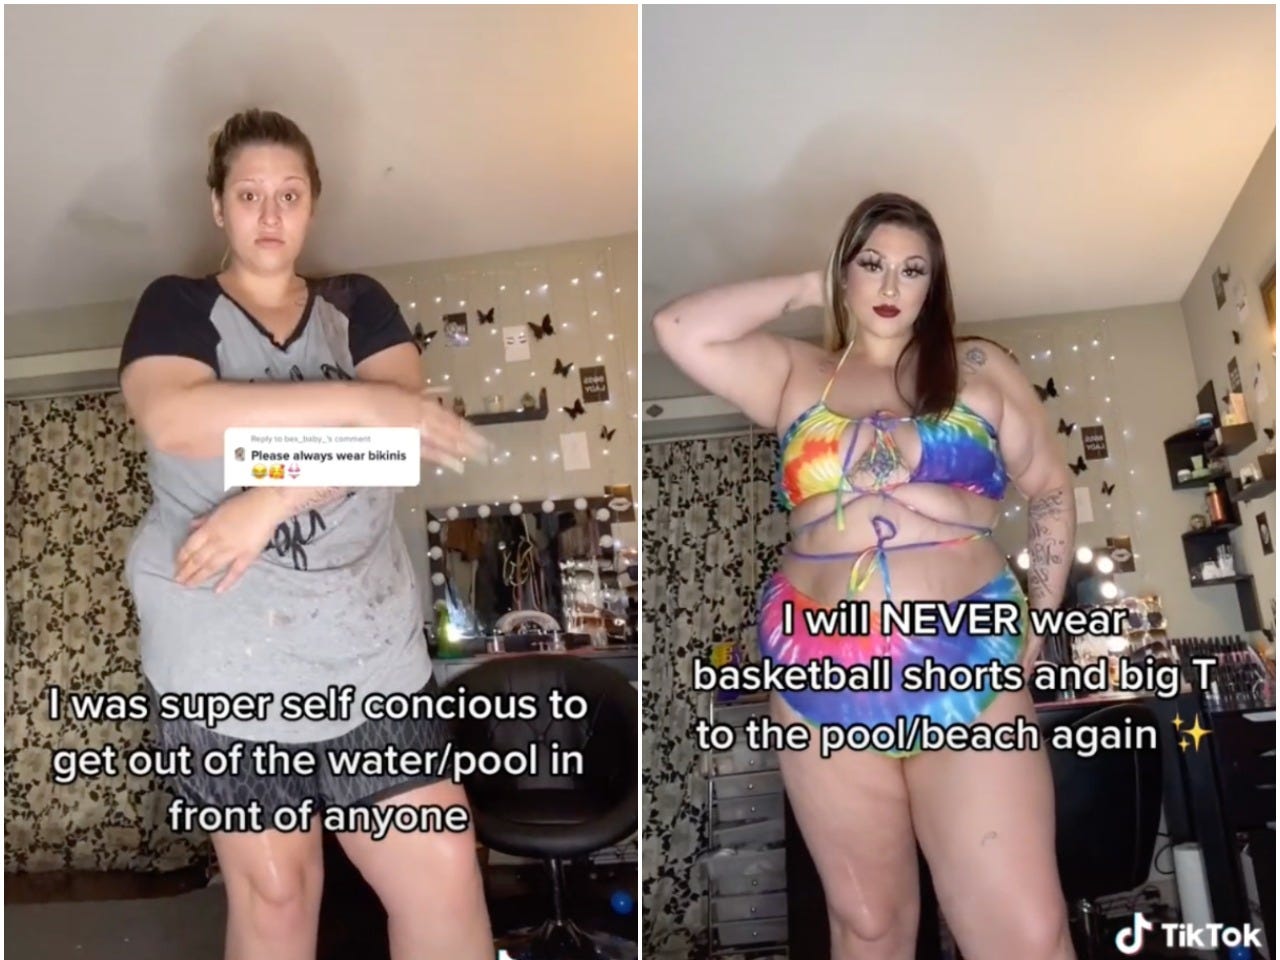 TikTok user @pressedbysativa wears a grey oversized t-shirt (left) before changing into a rainbow color strappy swimsuit (right).